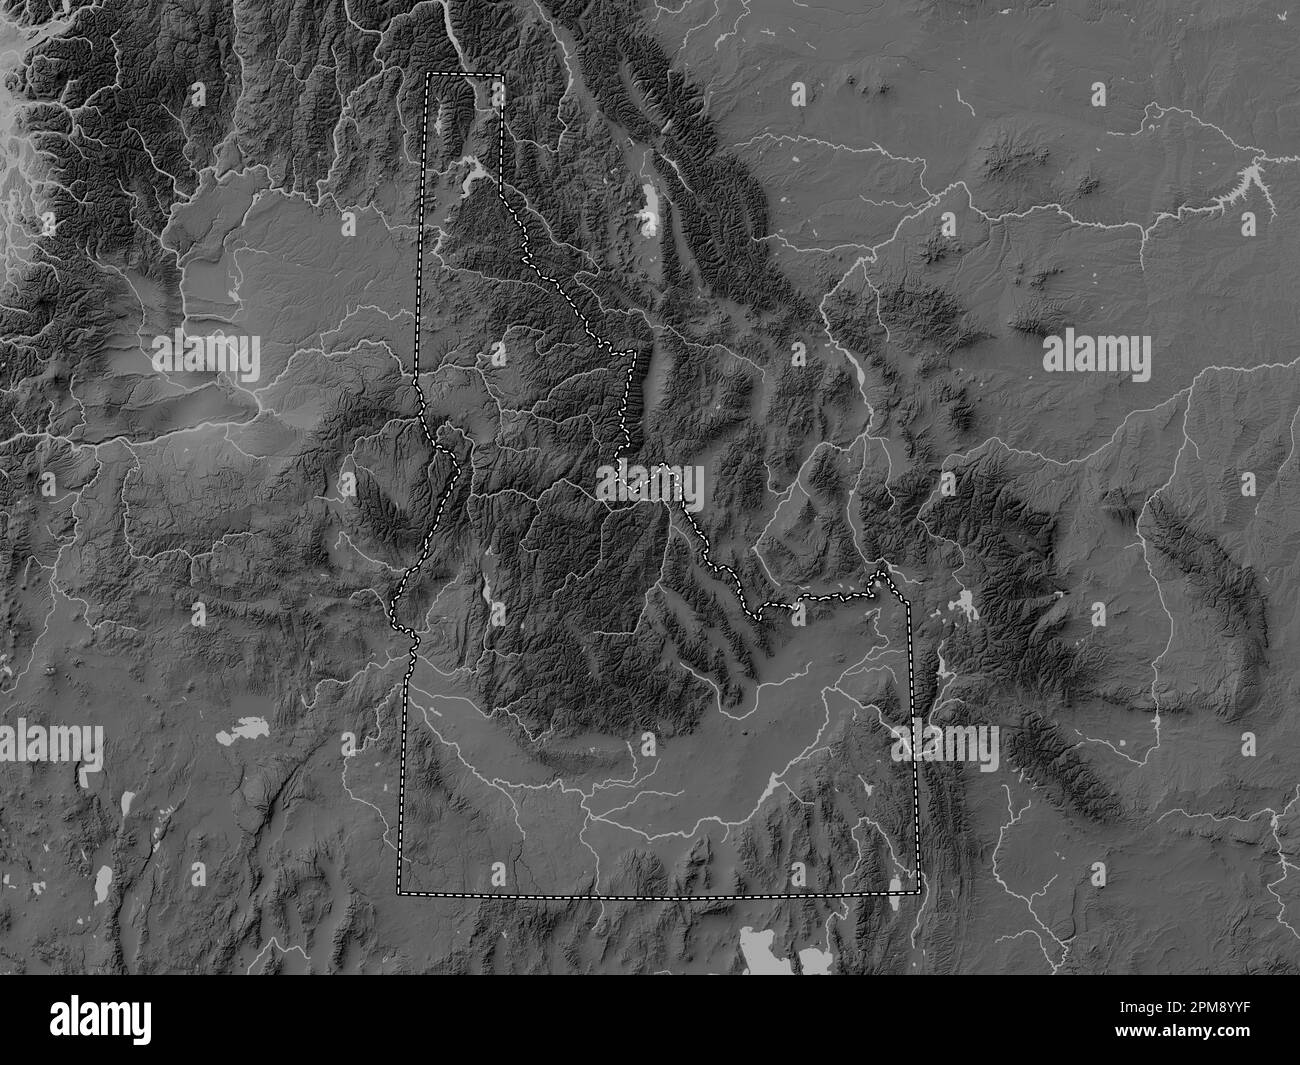 Idaho, state of United States of America. Grayscale elevation map with lakes and rivers Stock Photo